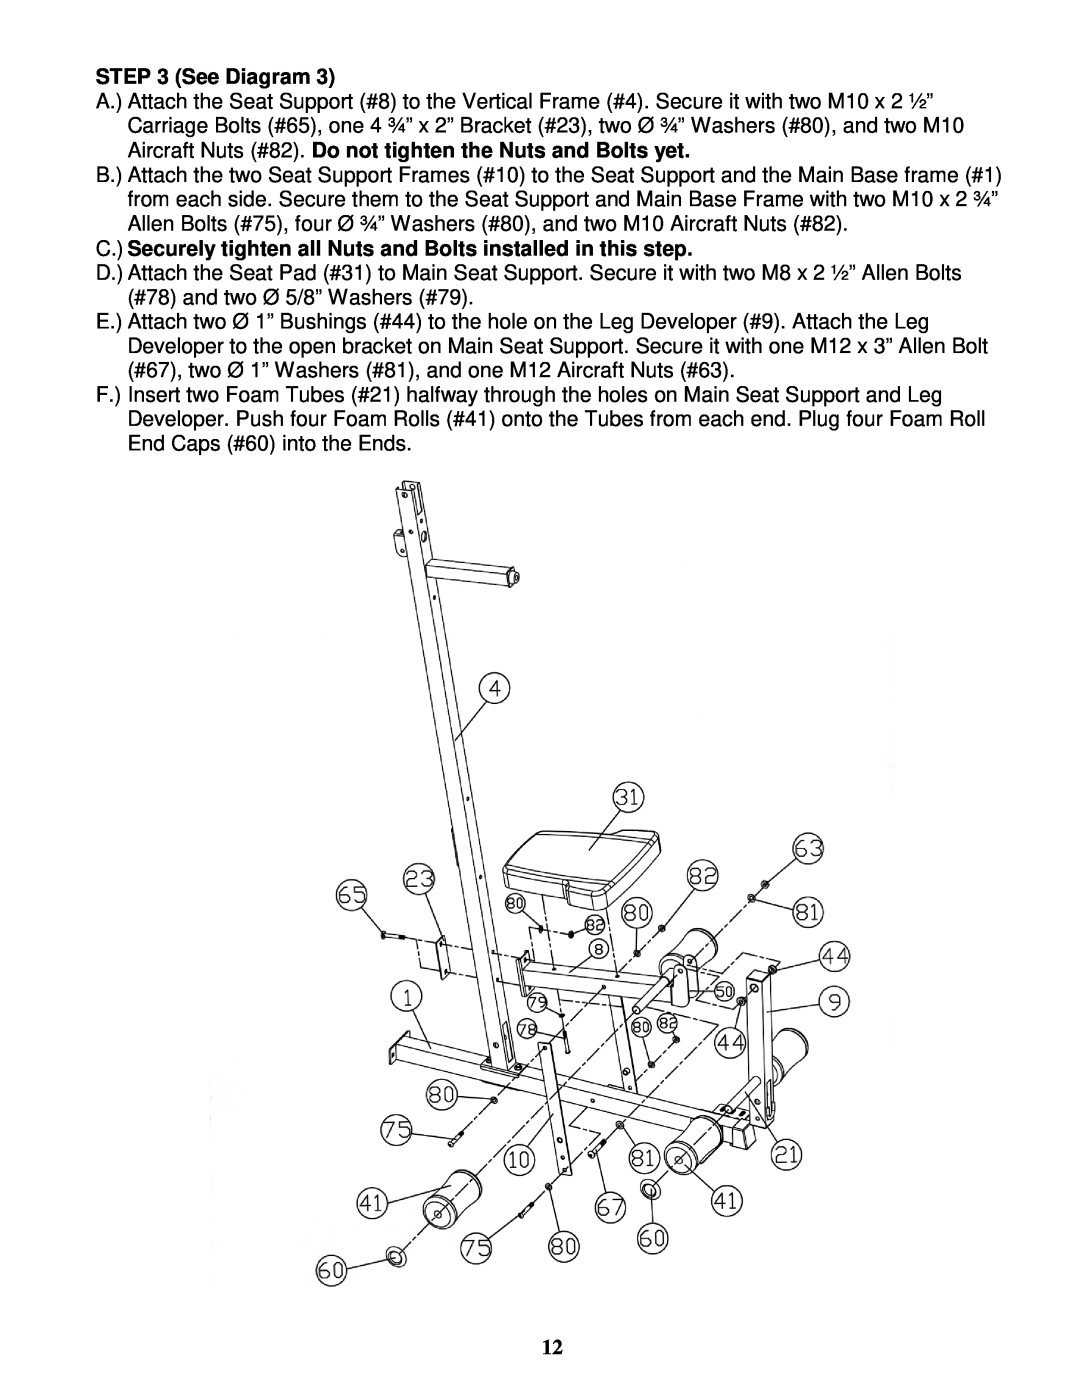 Impex MWM-8150 manual See Diagram, C. Securely tighten all Nuts and Bolts installed in this step 